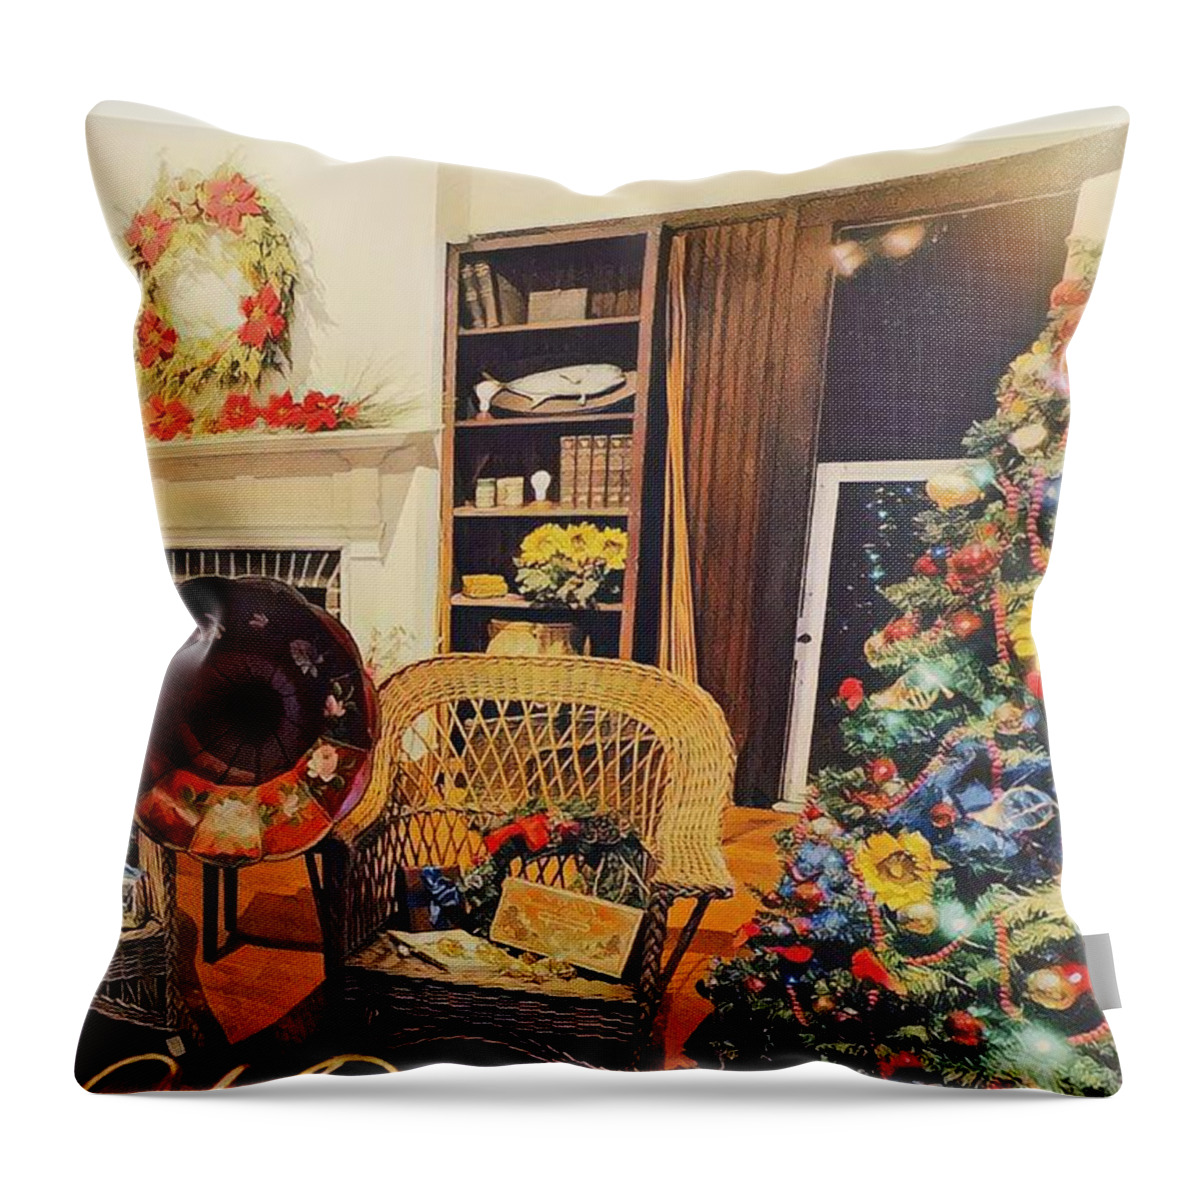 Christmas Throw Pillow featuring the photograph Merry Christmas 3 by Claudia Zahnd-Prezioso